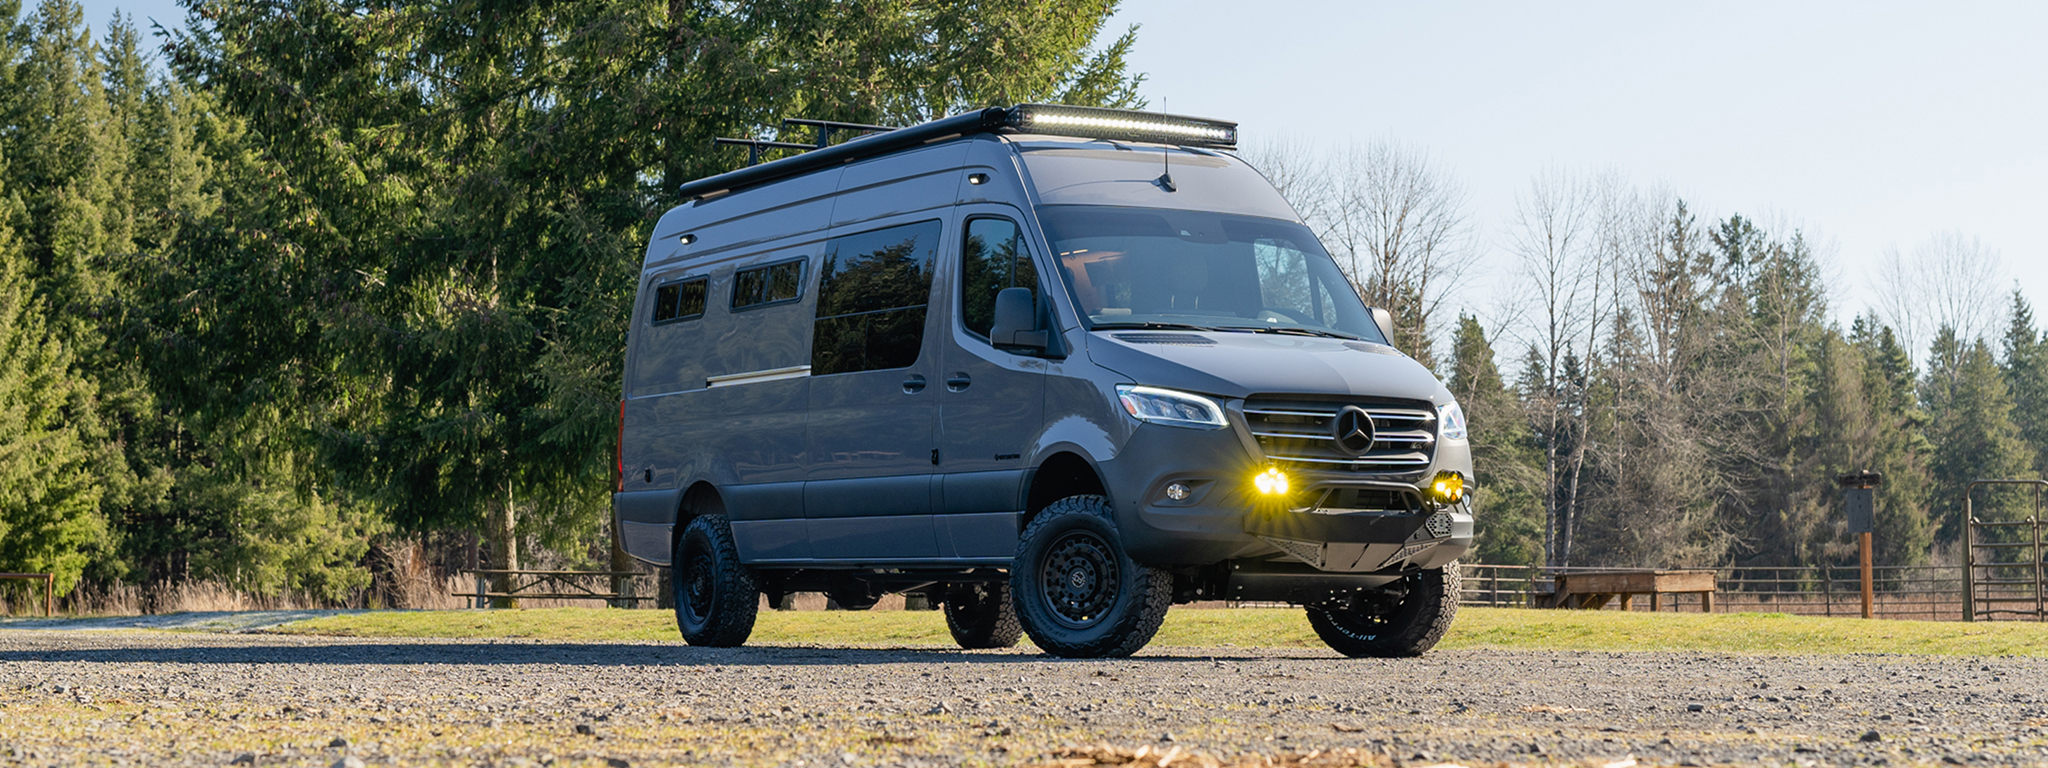 Exterior Mercedes-Benz Sprinter Van 170 with the lights on in a field